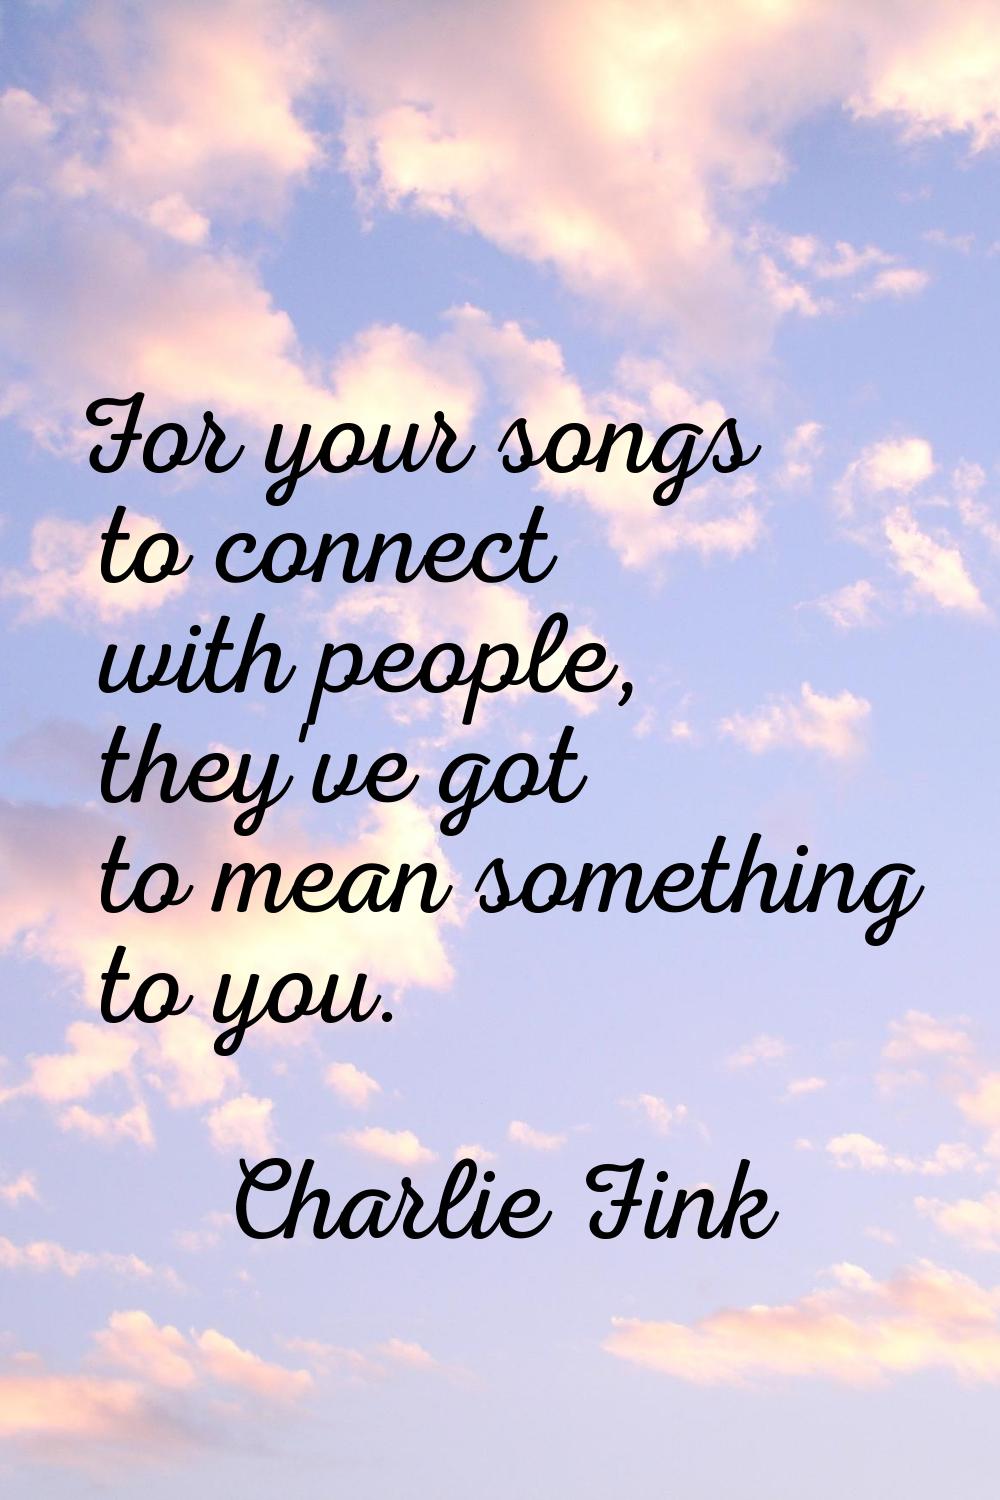 For your songs to connect with people, they've got to mean something to you.